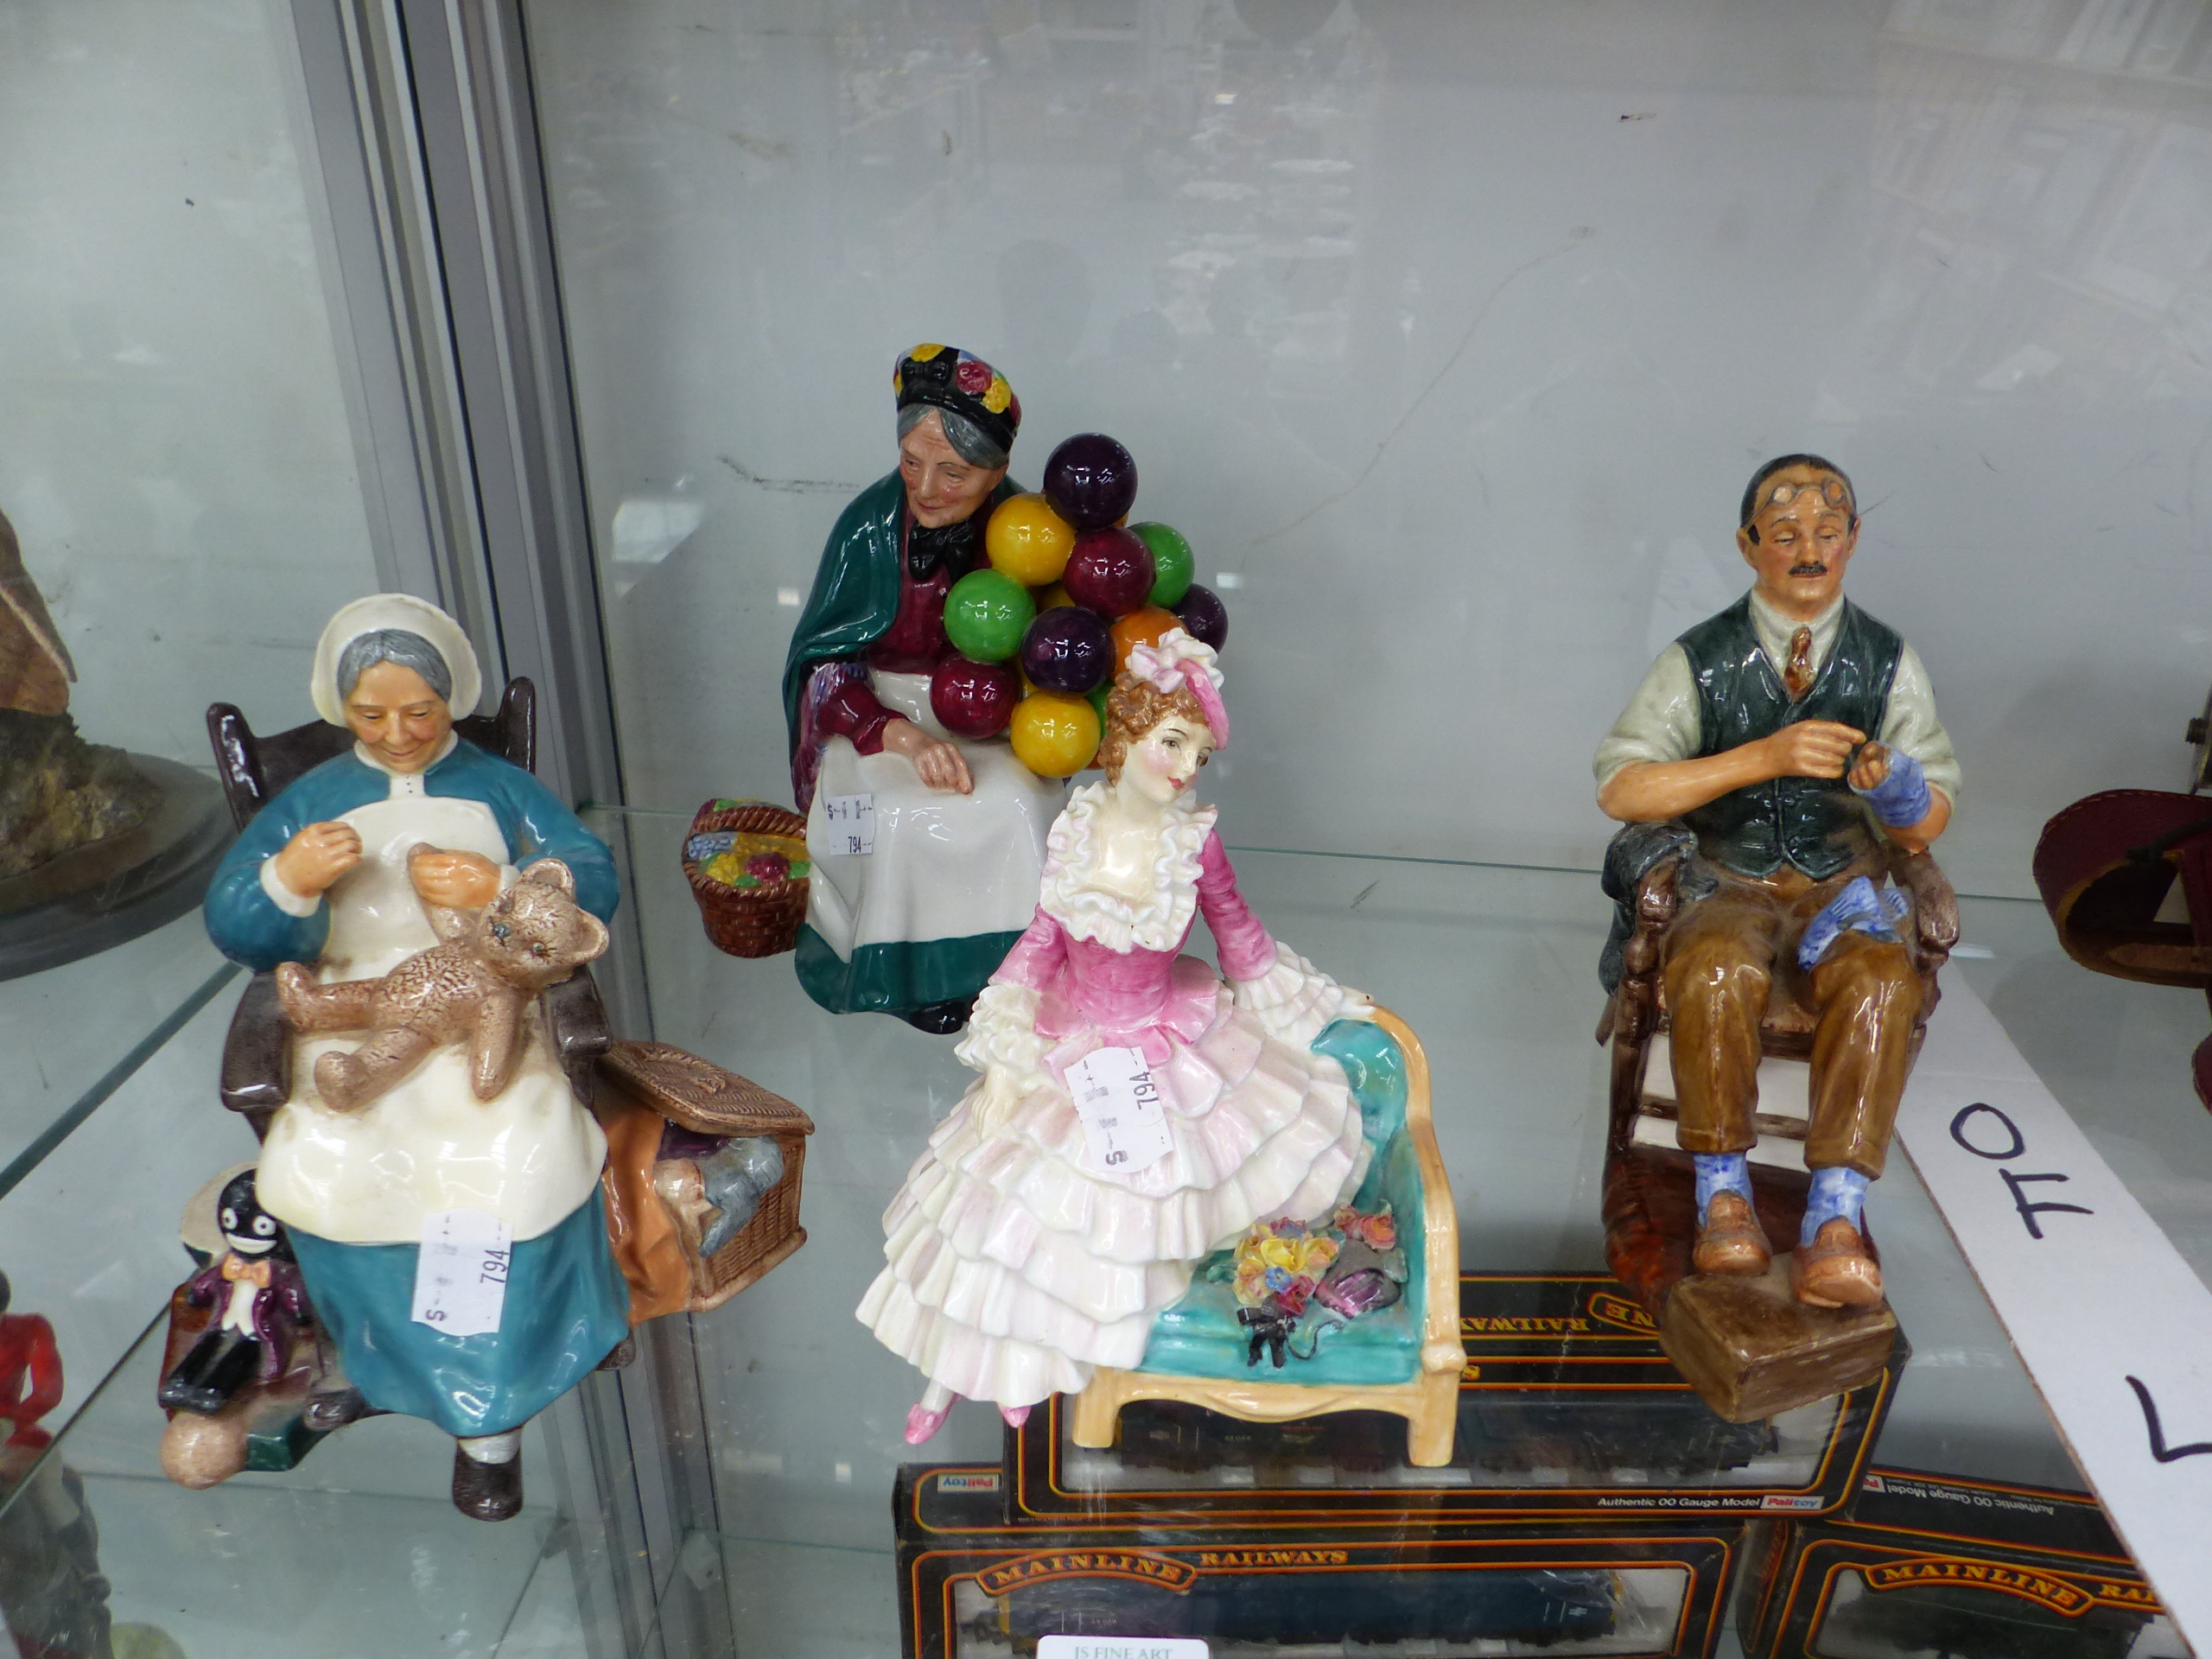 FOUR ROYAL DOULTON FIGURINES TO INCLUDE, THE BATCHELOR, SONIA, NANNY AND THE BALLOON SELLER.